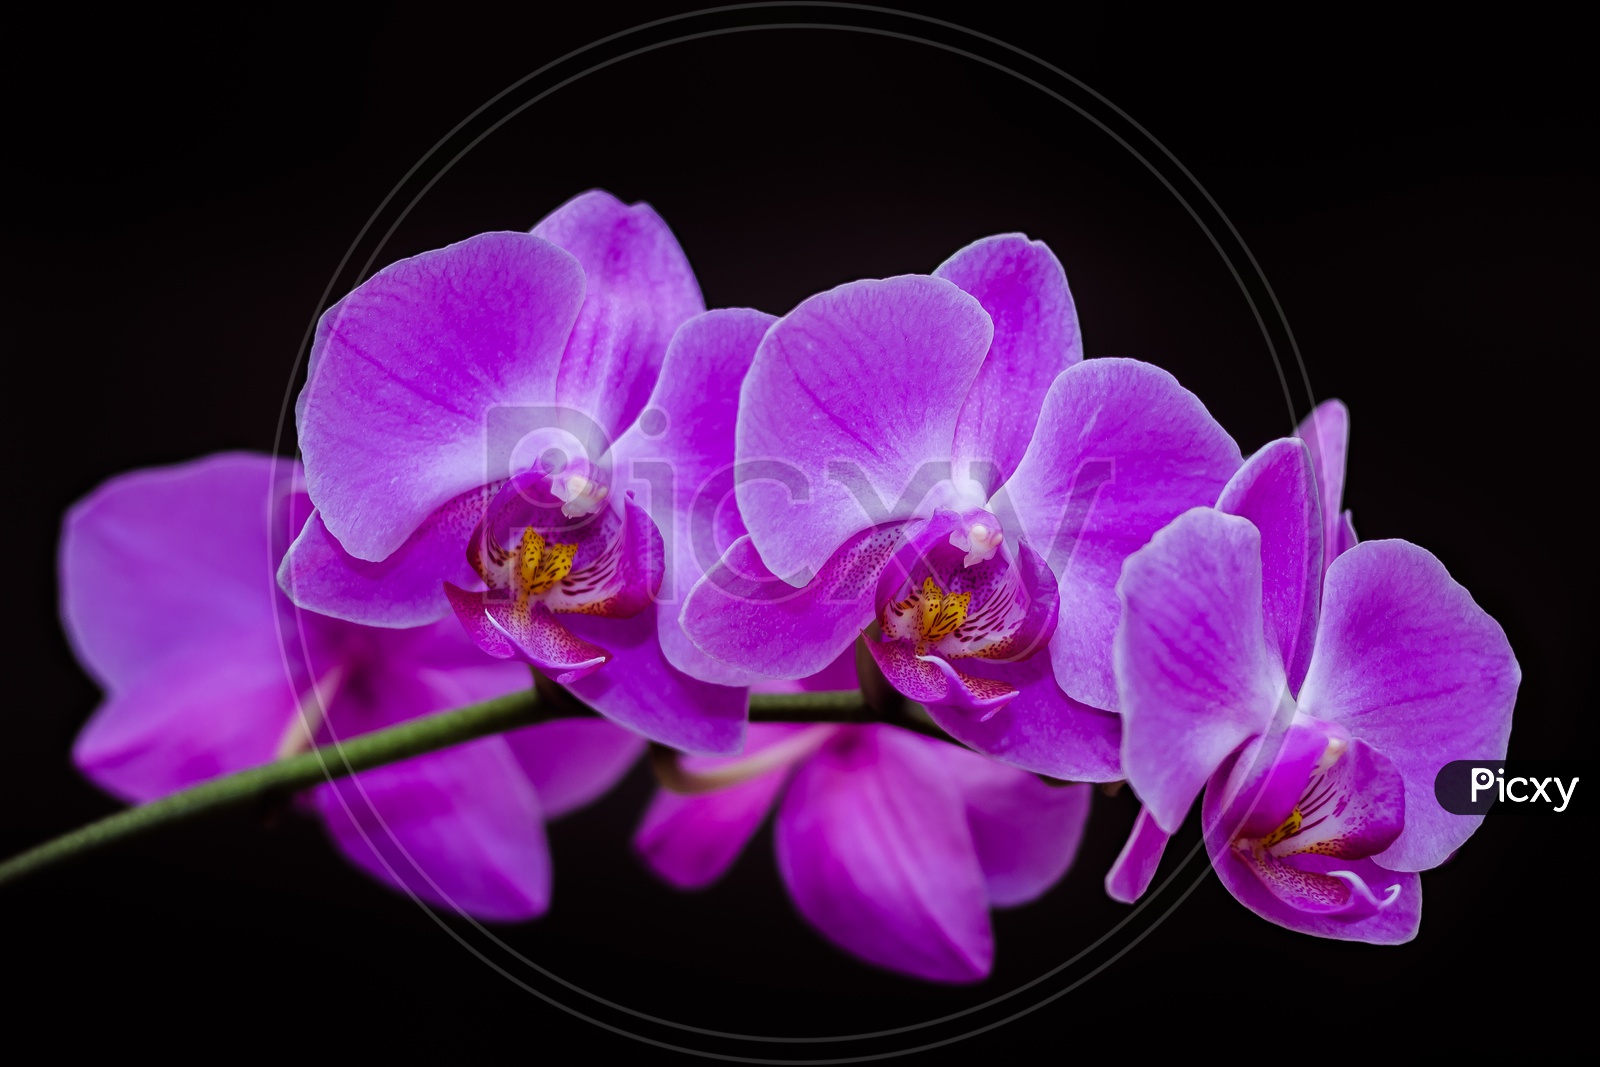 Large flowers of a purple orchid on a black background, on the whole image.